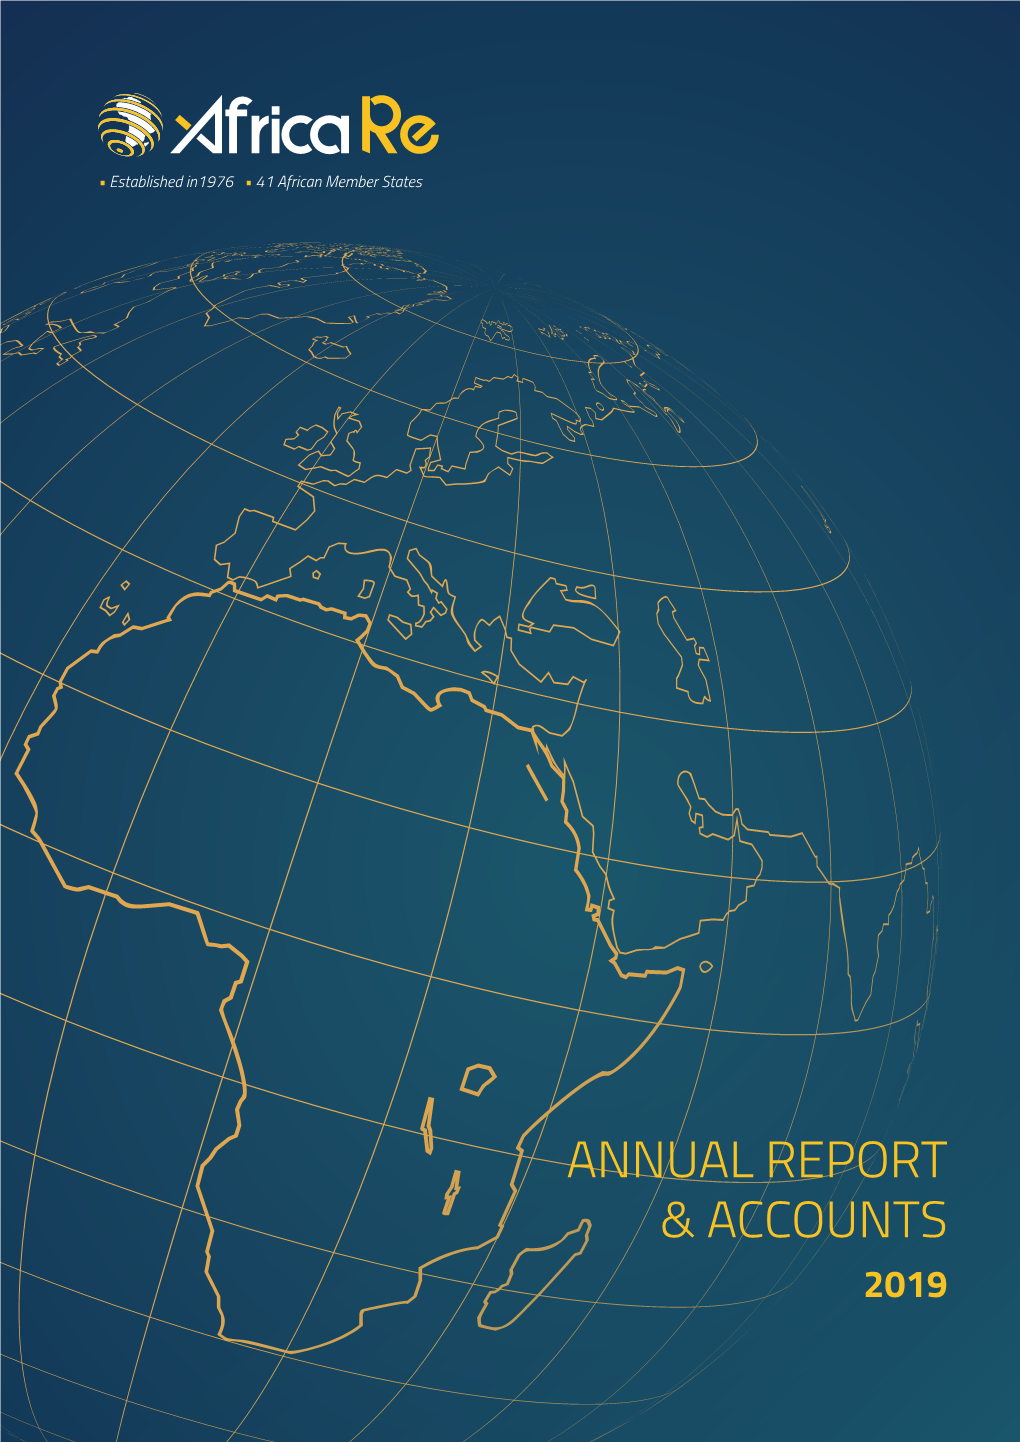 Africa Re Annual Report & Accounts 2019